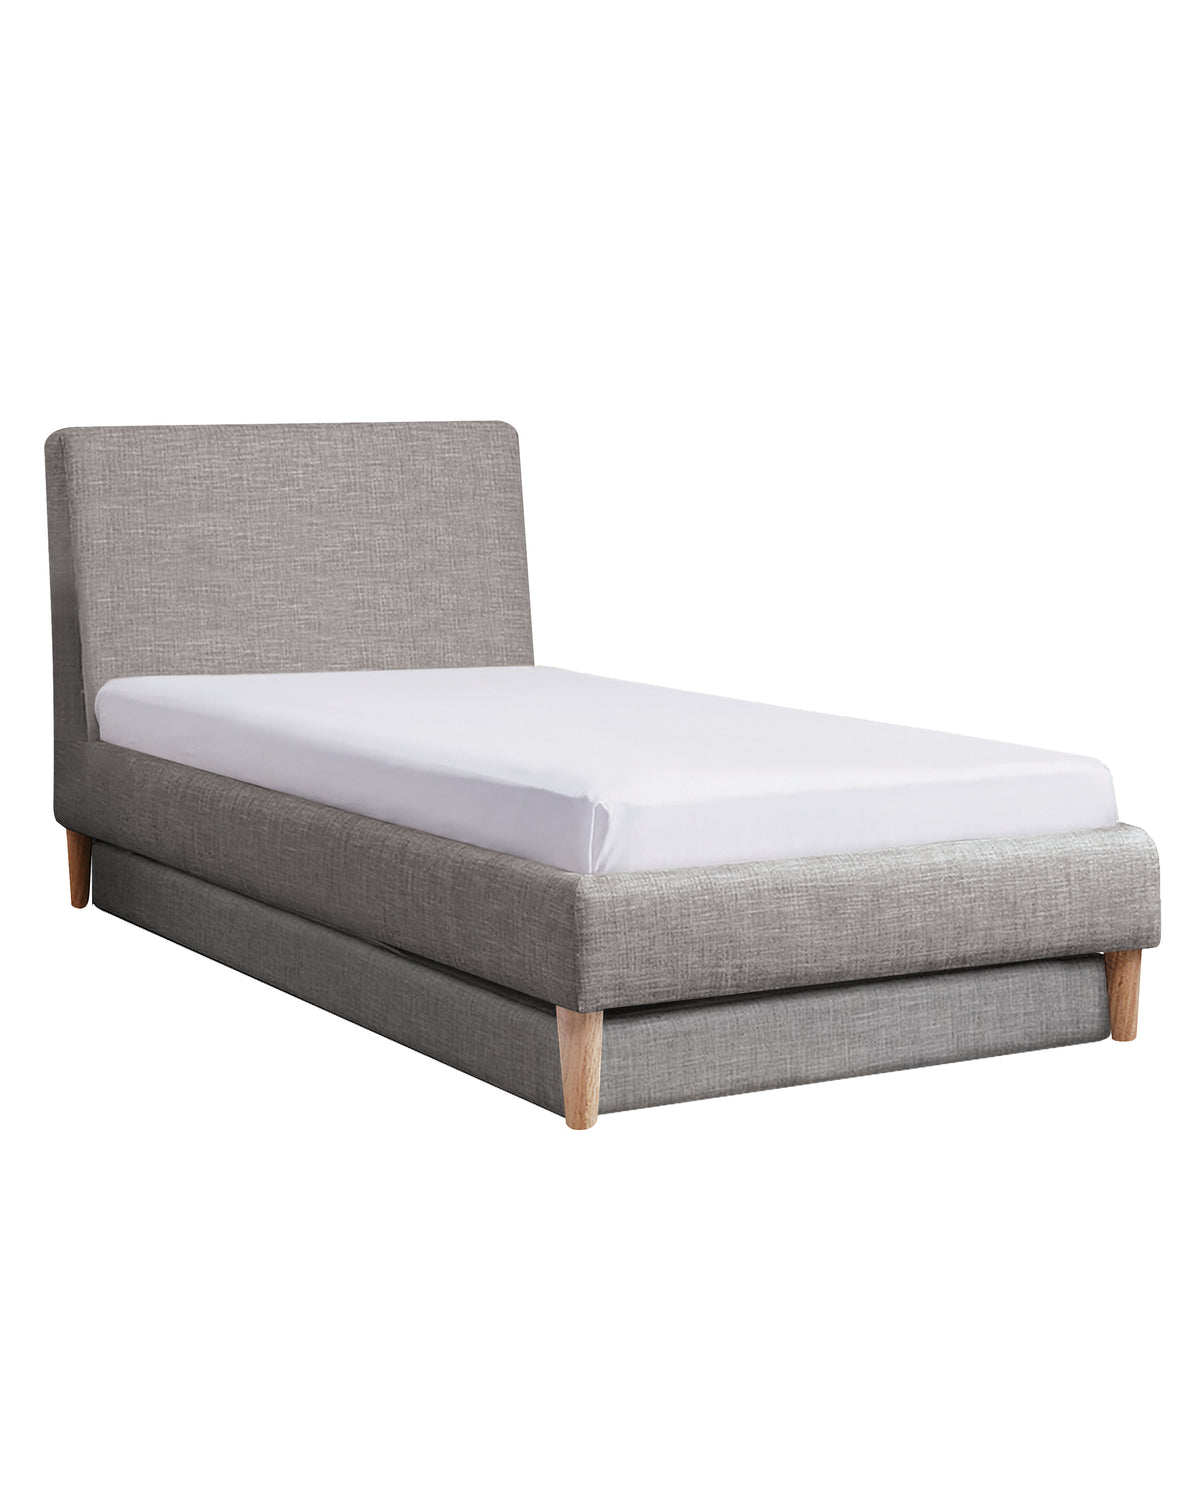 SCOUT UPHOLSTERED BED